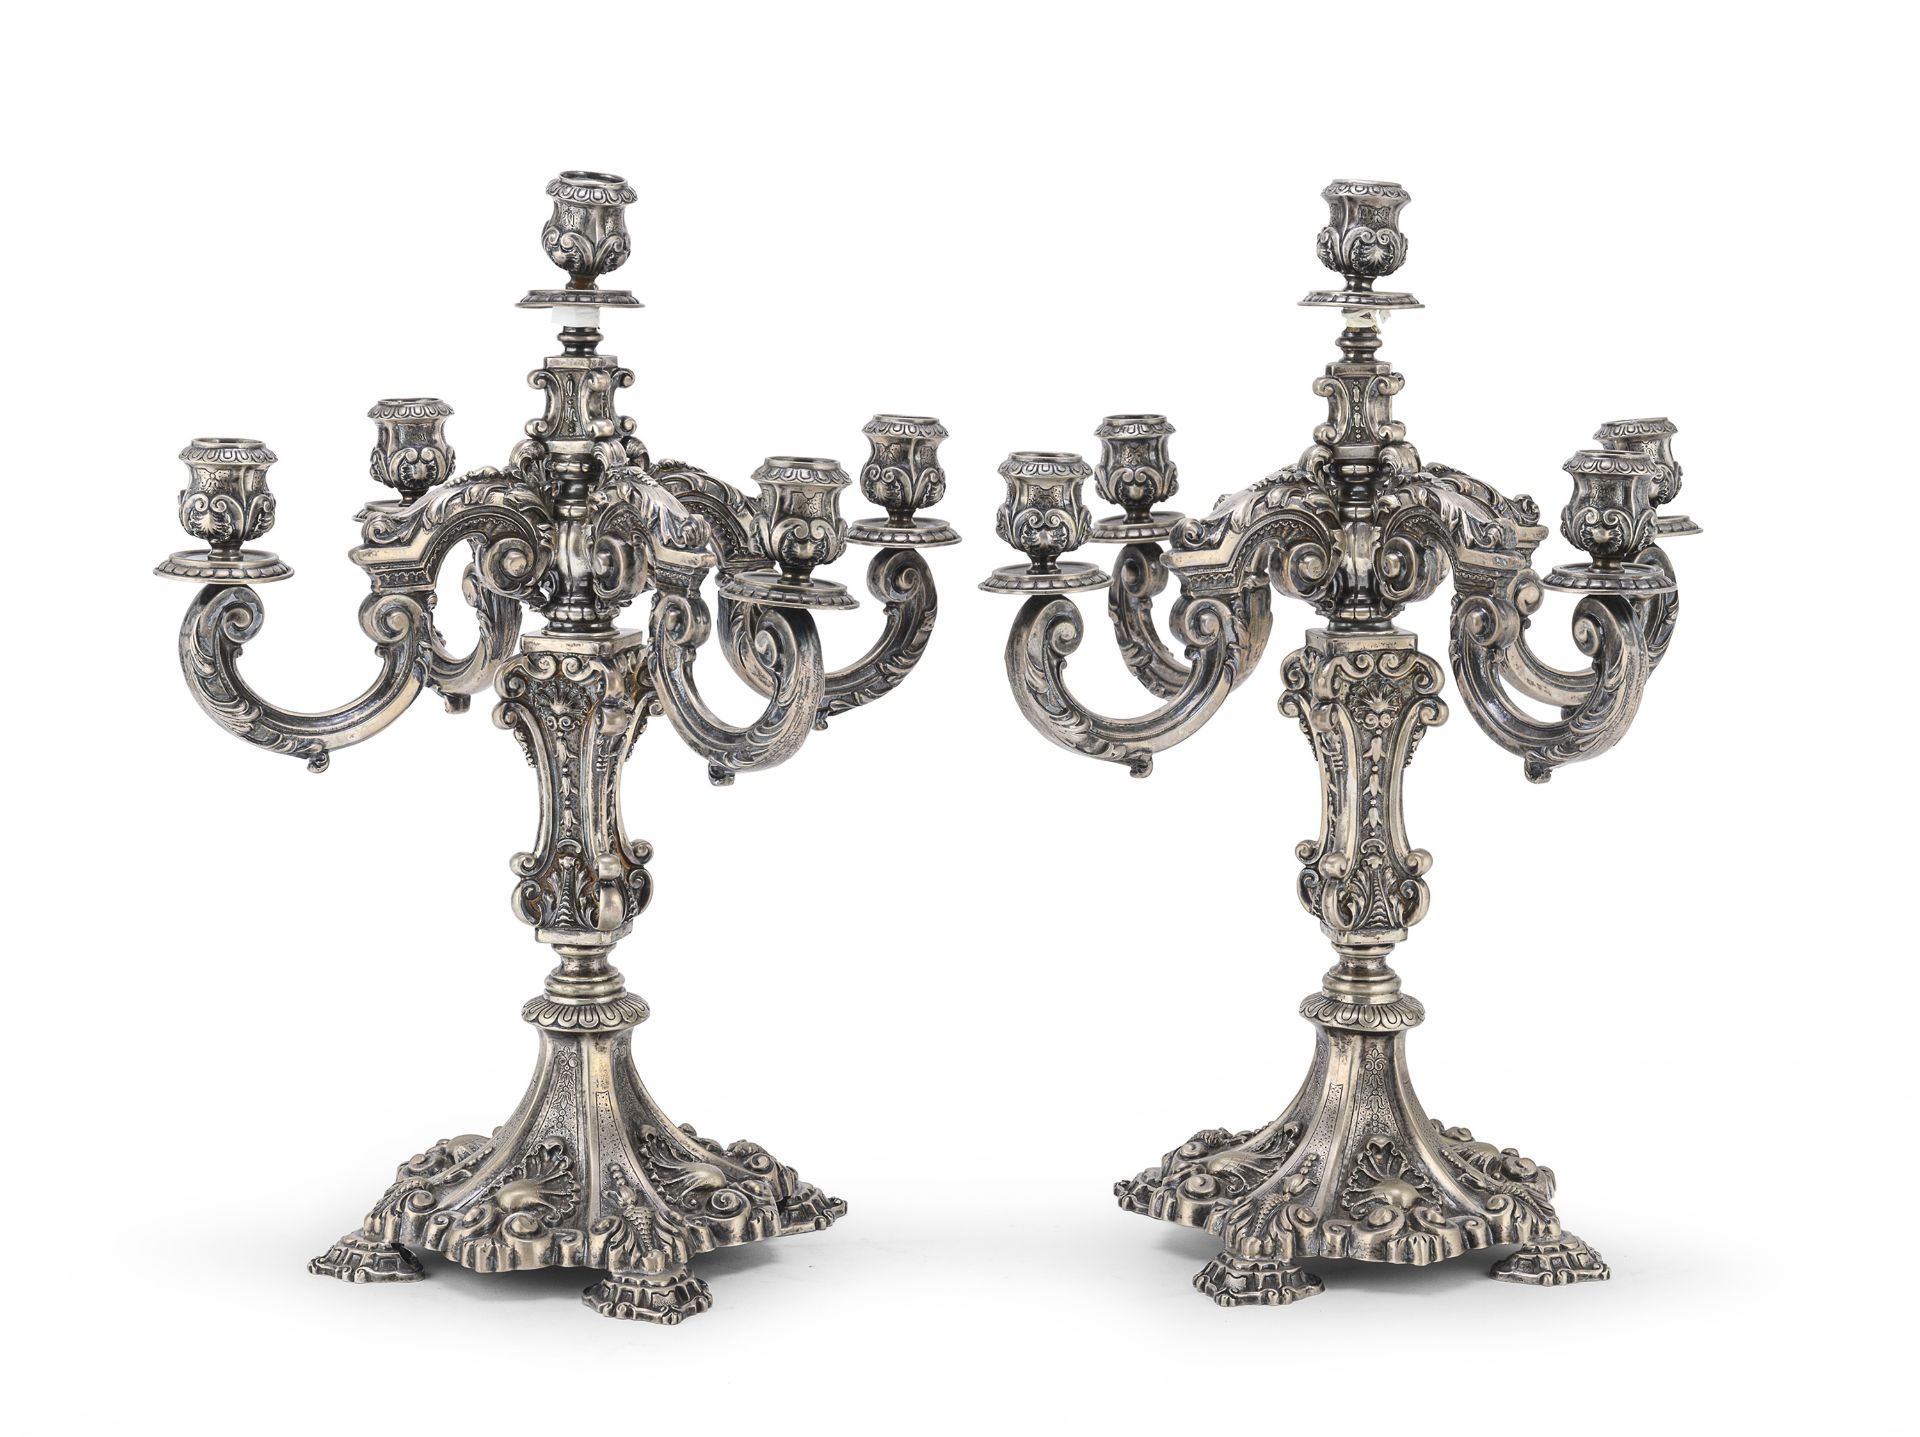 PAIR OF SILVER CANDLESTICKS PORTUGUESE PORT EARLY 20TH CENTURY